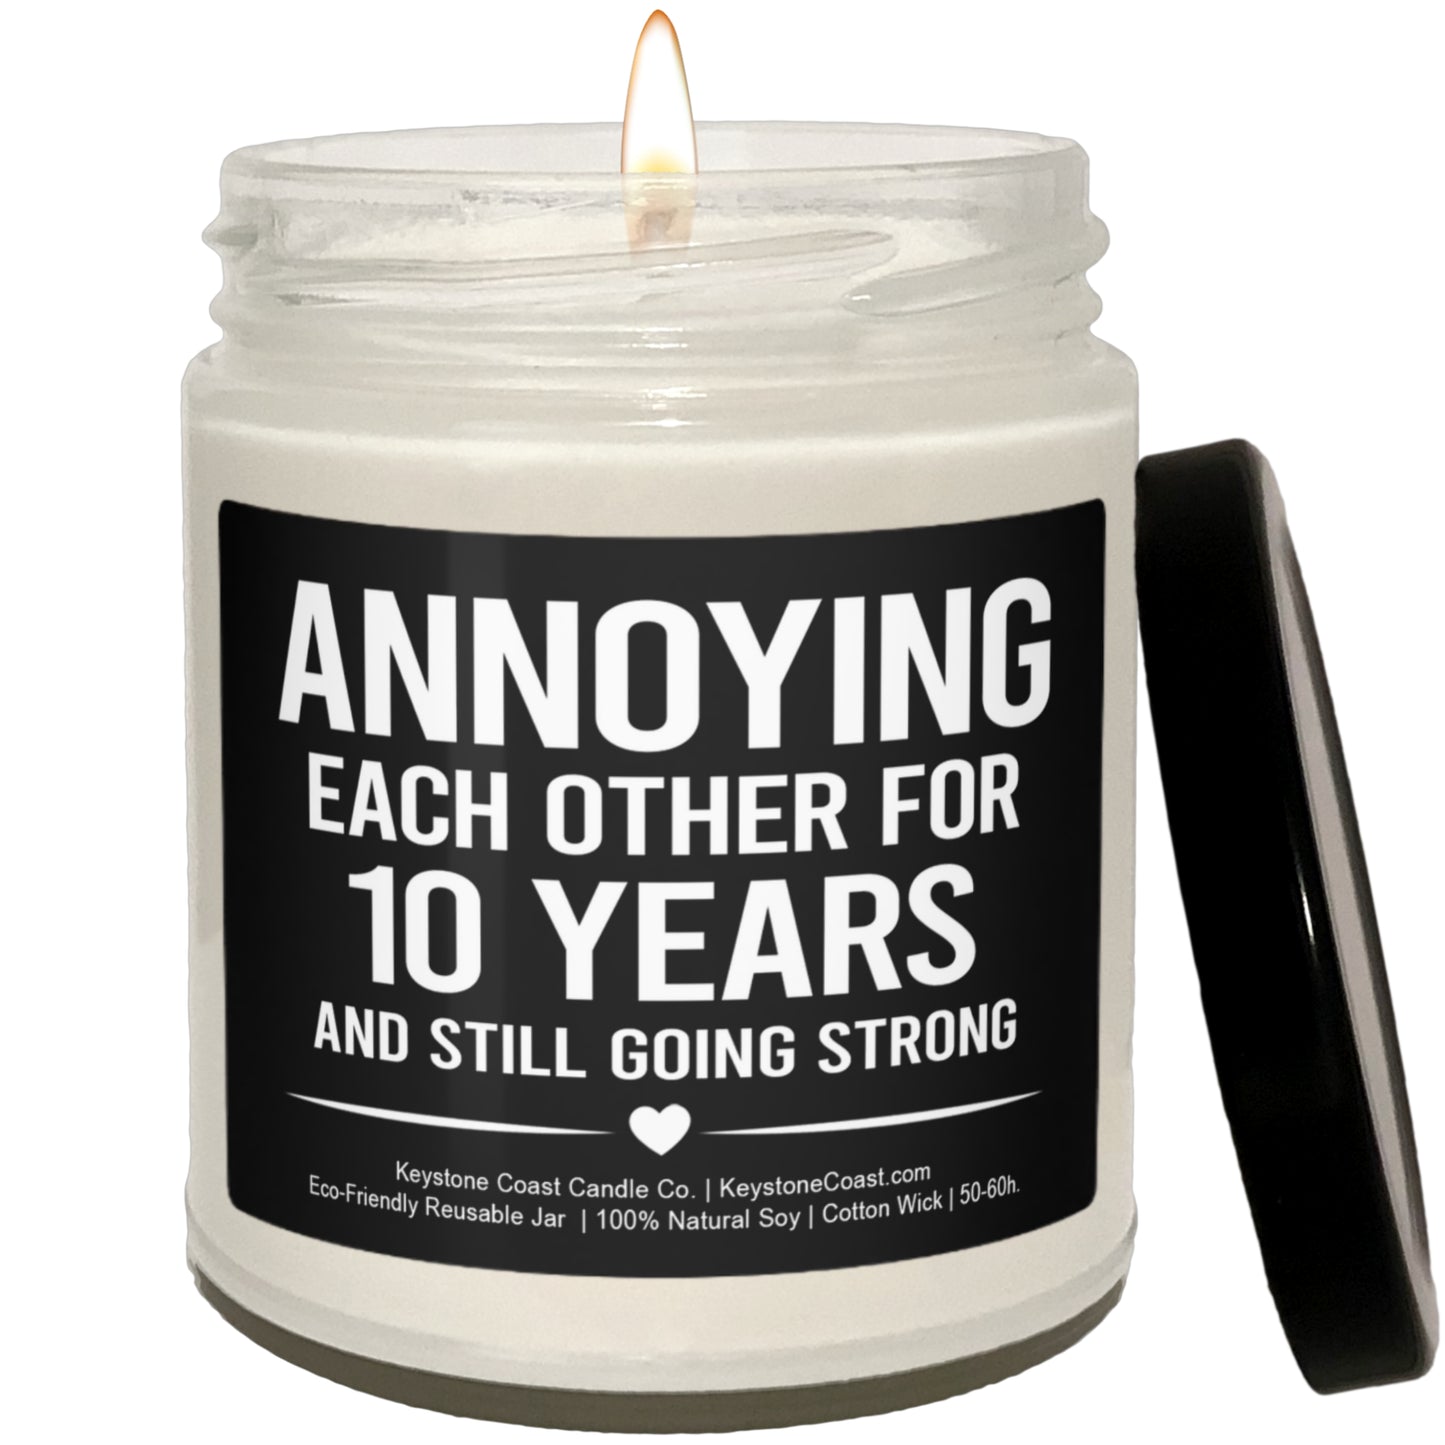 Annoying each other for 10 years Scented Soy Candle, 9oz